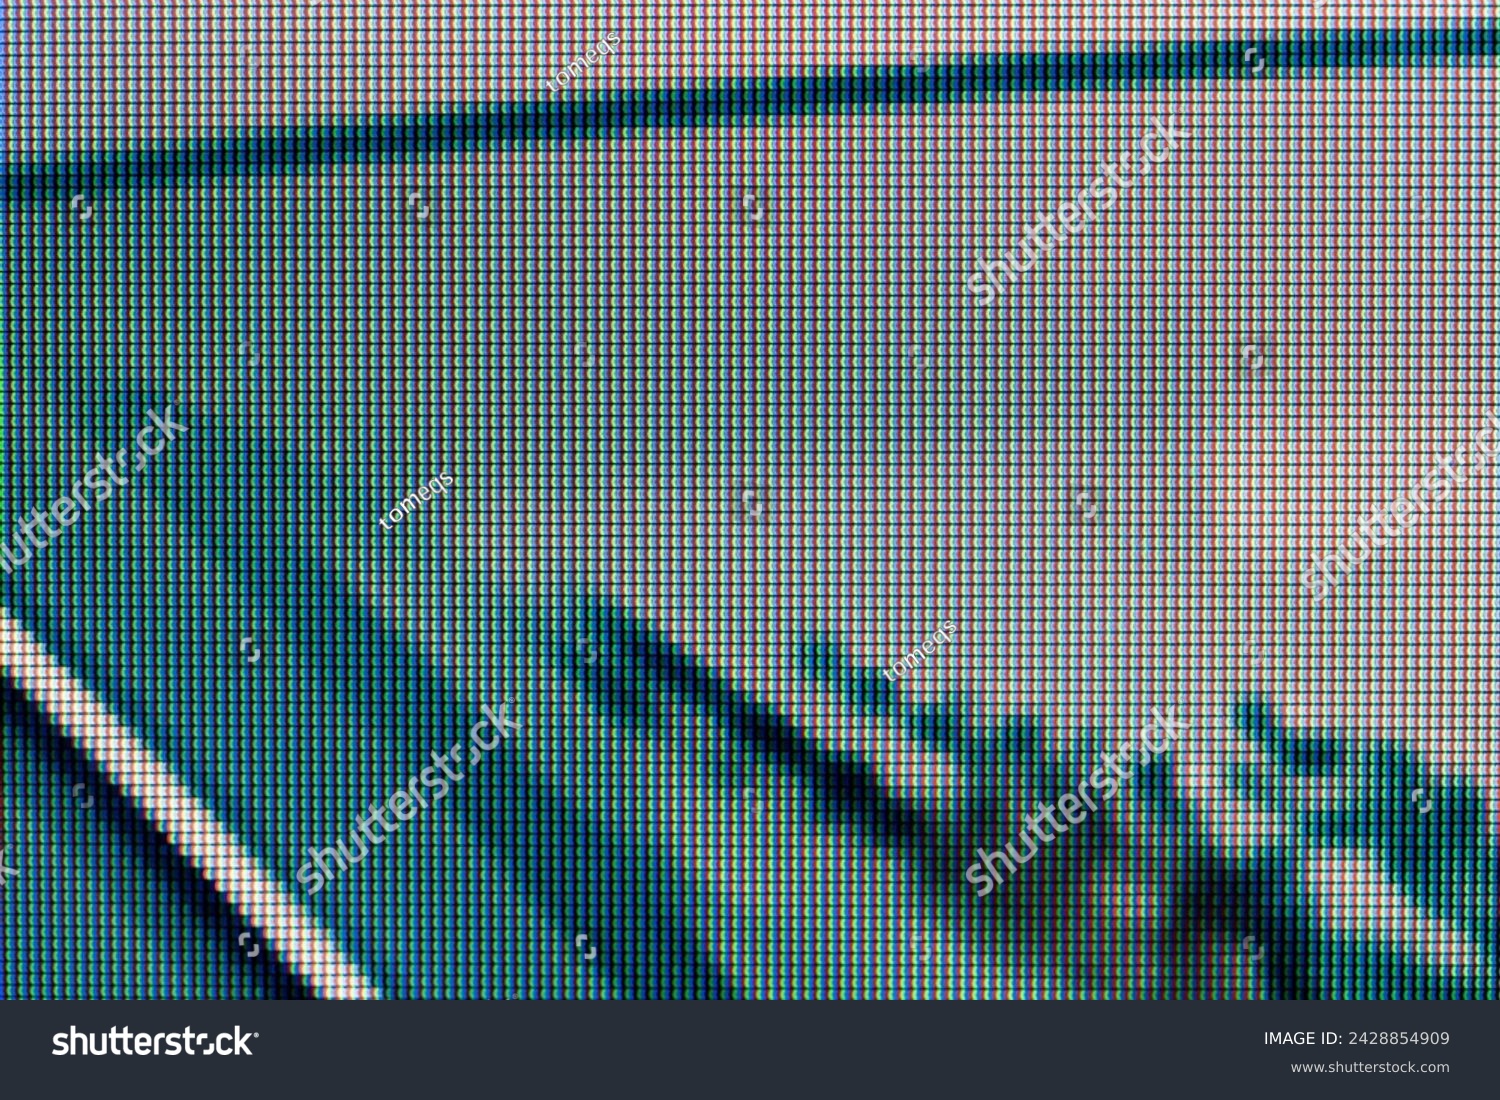 A magnified look at the pixels of an LCD screen, dark green grey white black creepy scary unnerving digital tech background monitor display texture macro detail front view, extreme closeup, nobody #2428854909